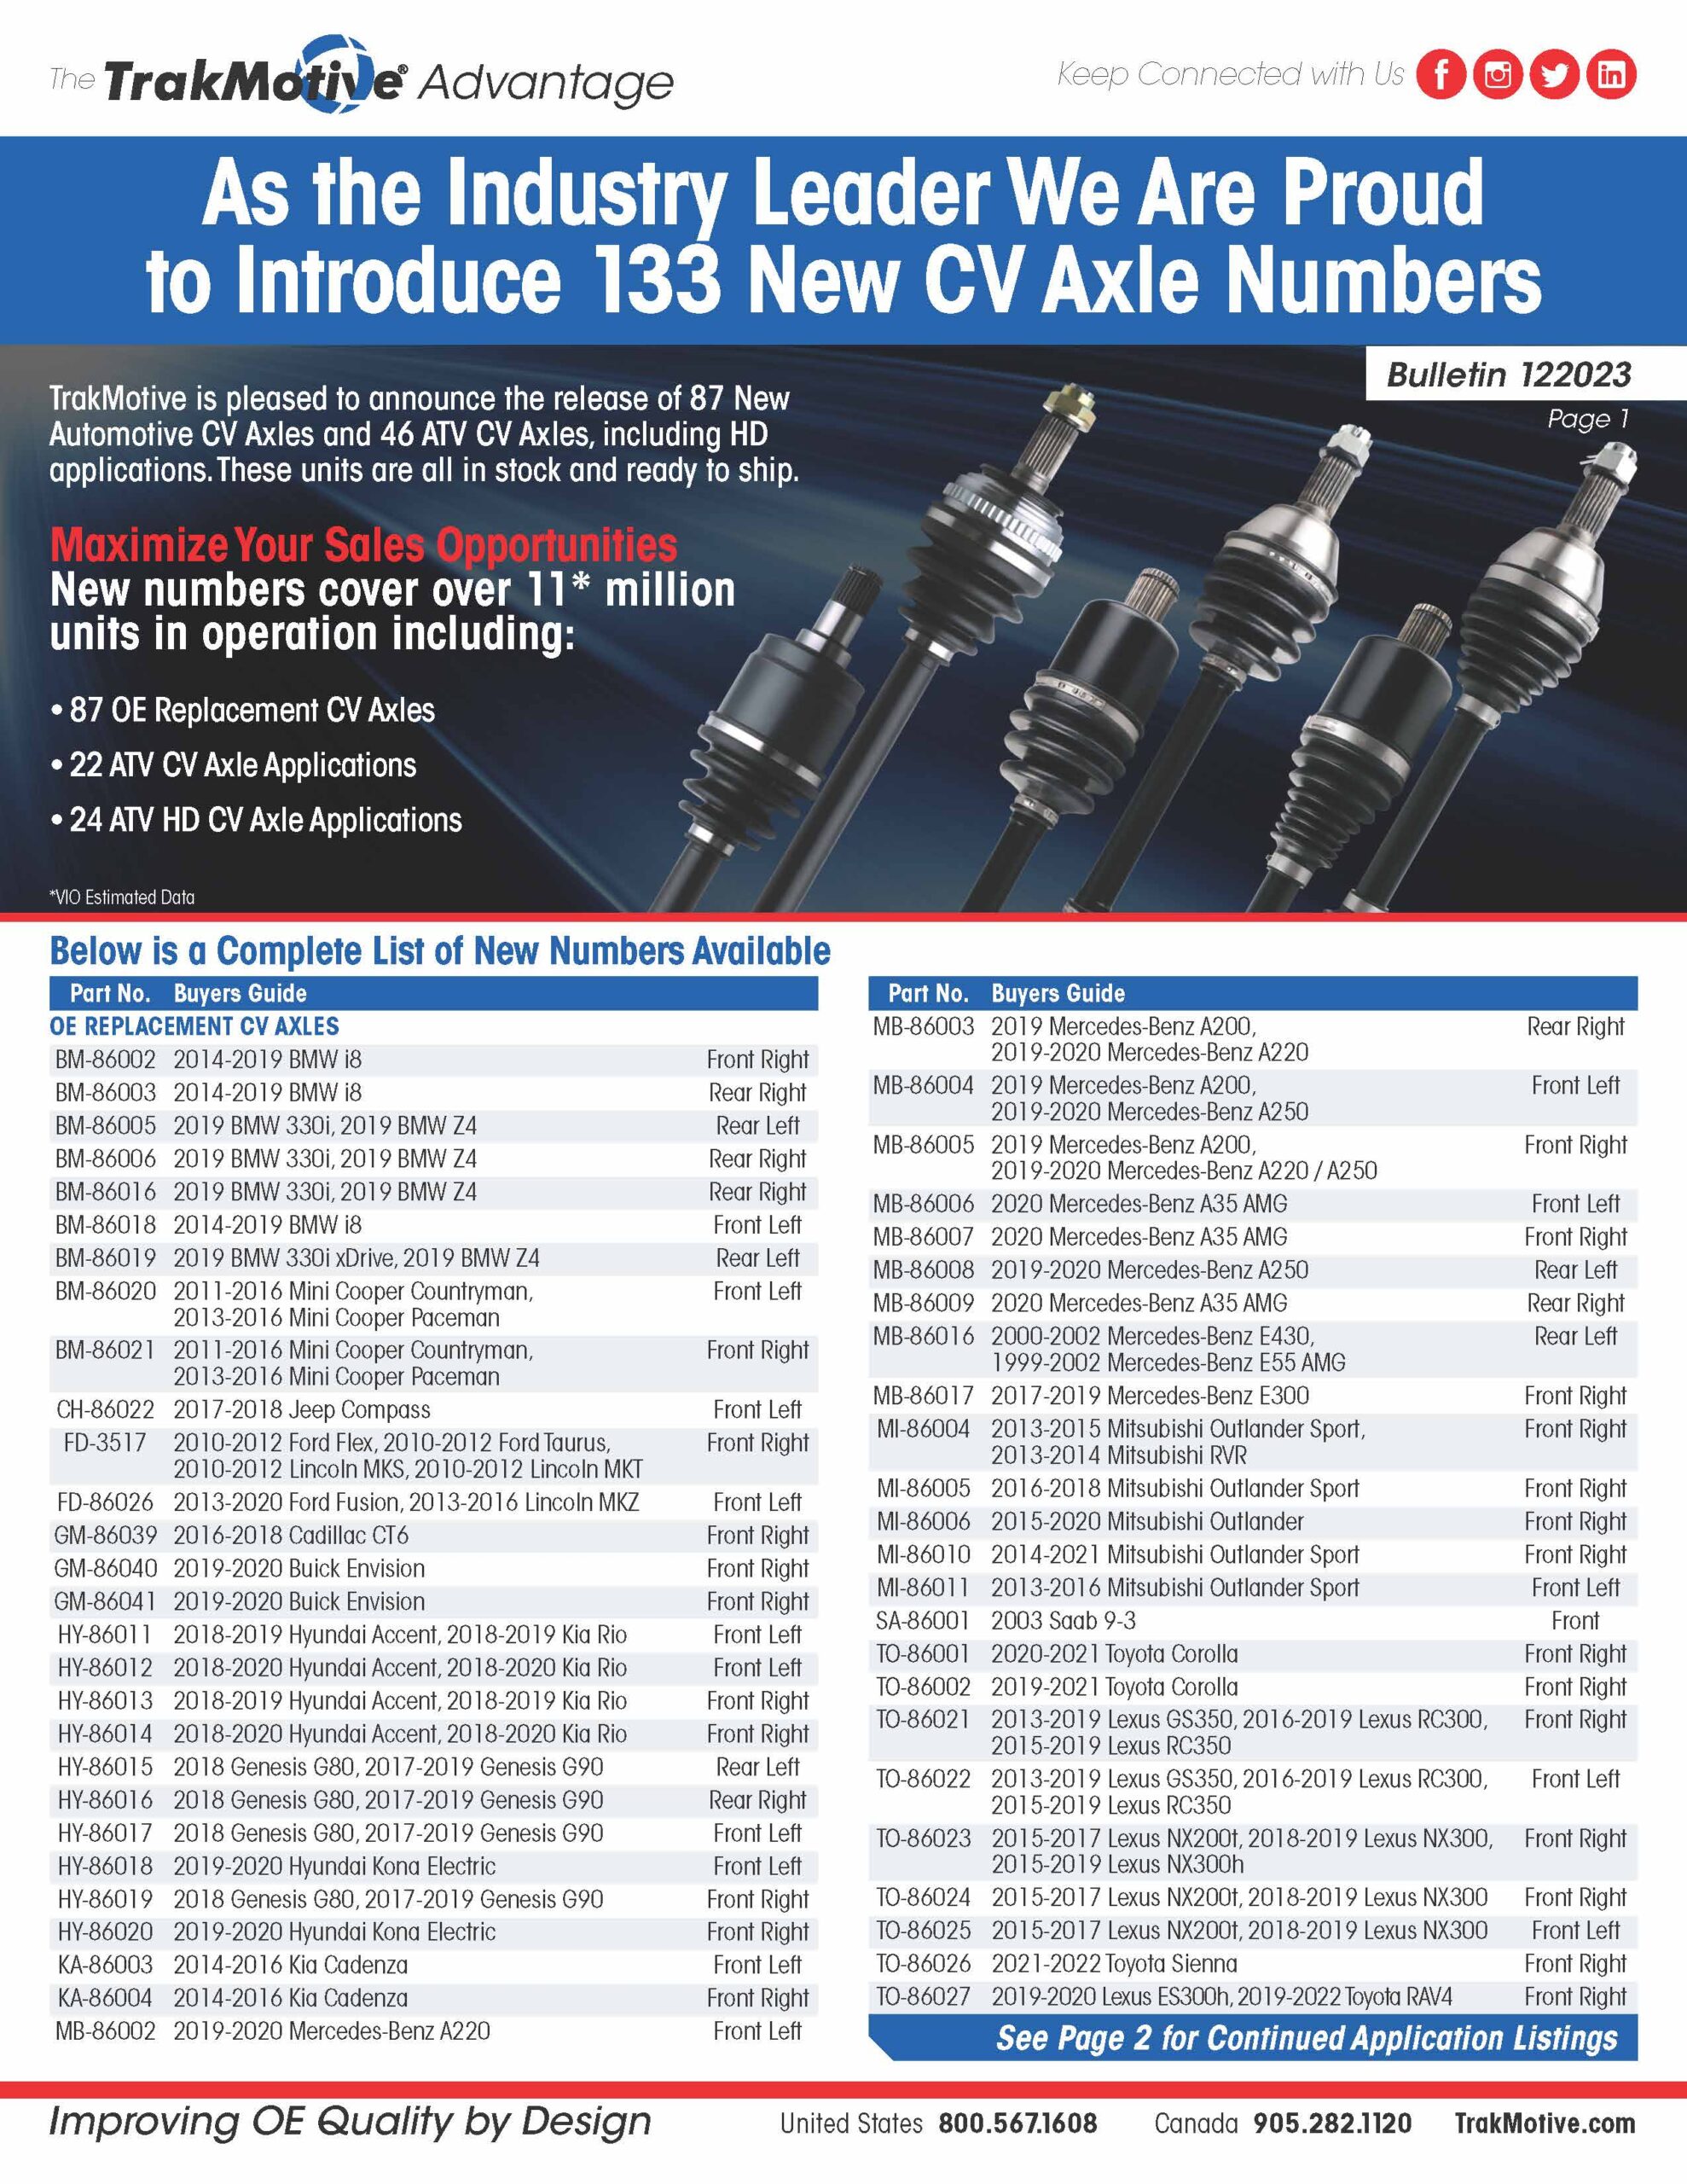 12/2023: TrakMotive Adds 133 New CV Axle Numbers